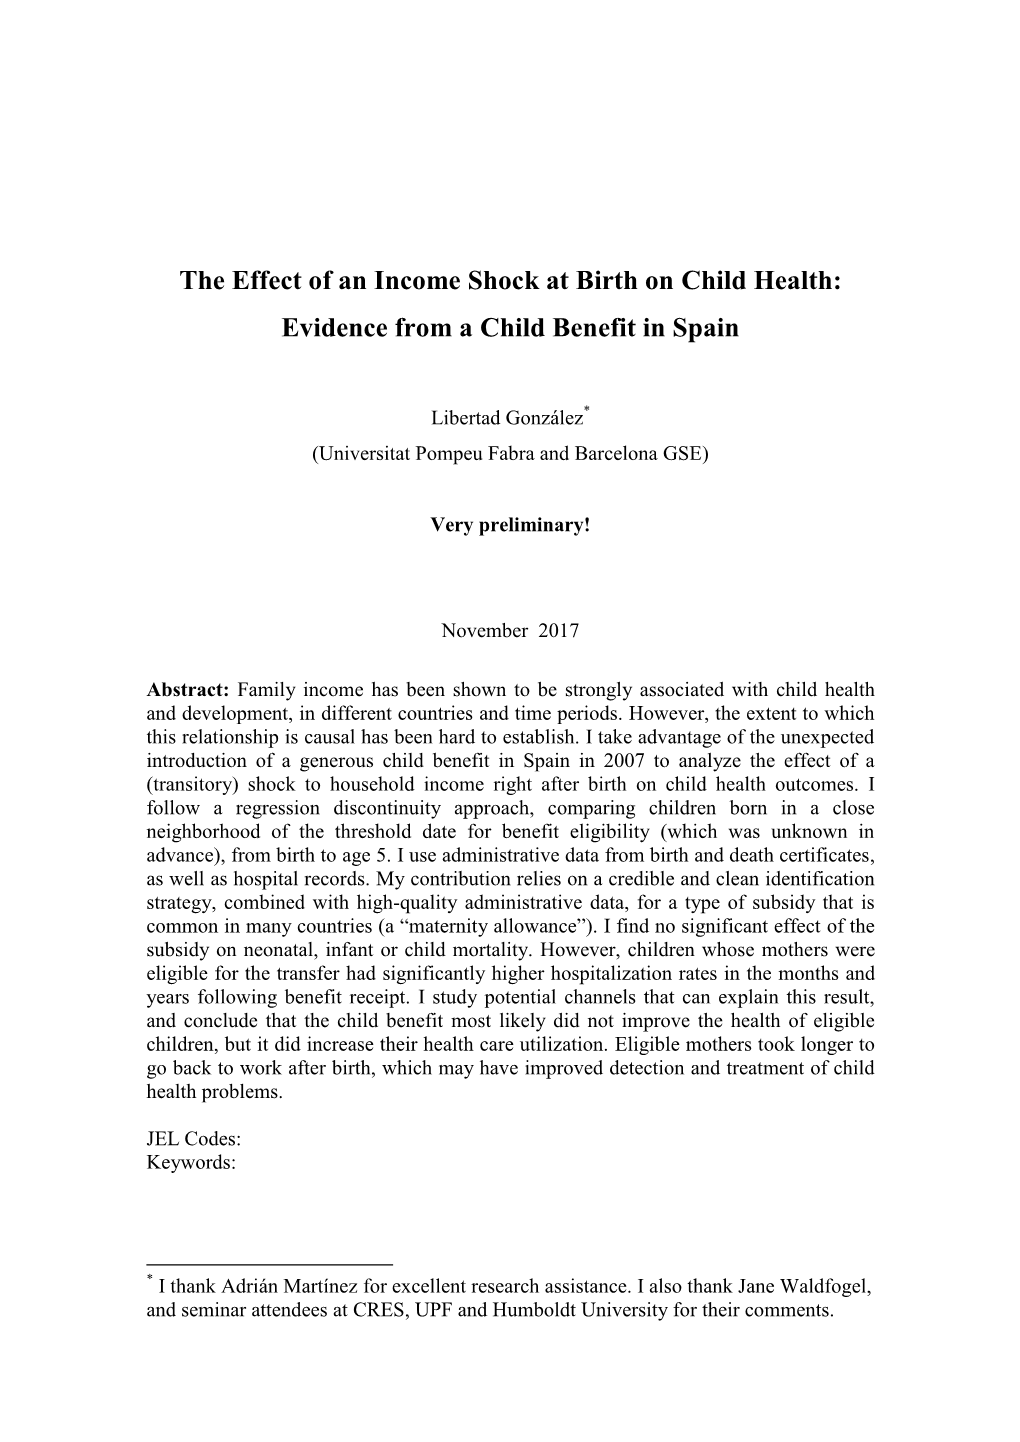 The Effect of an Income Shock at Birth on Child Health: Evidence from a Child Benefit in Spain